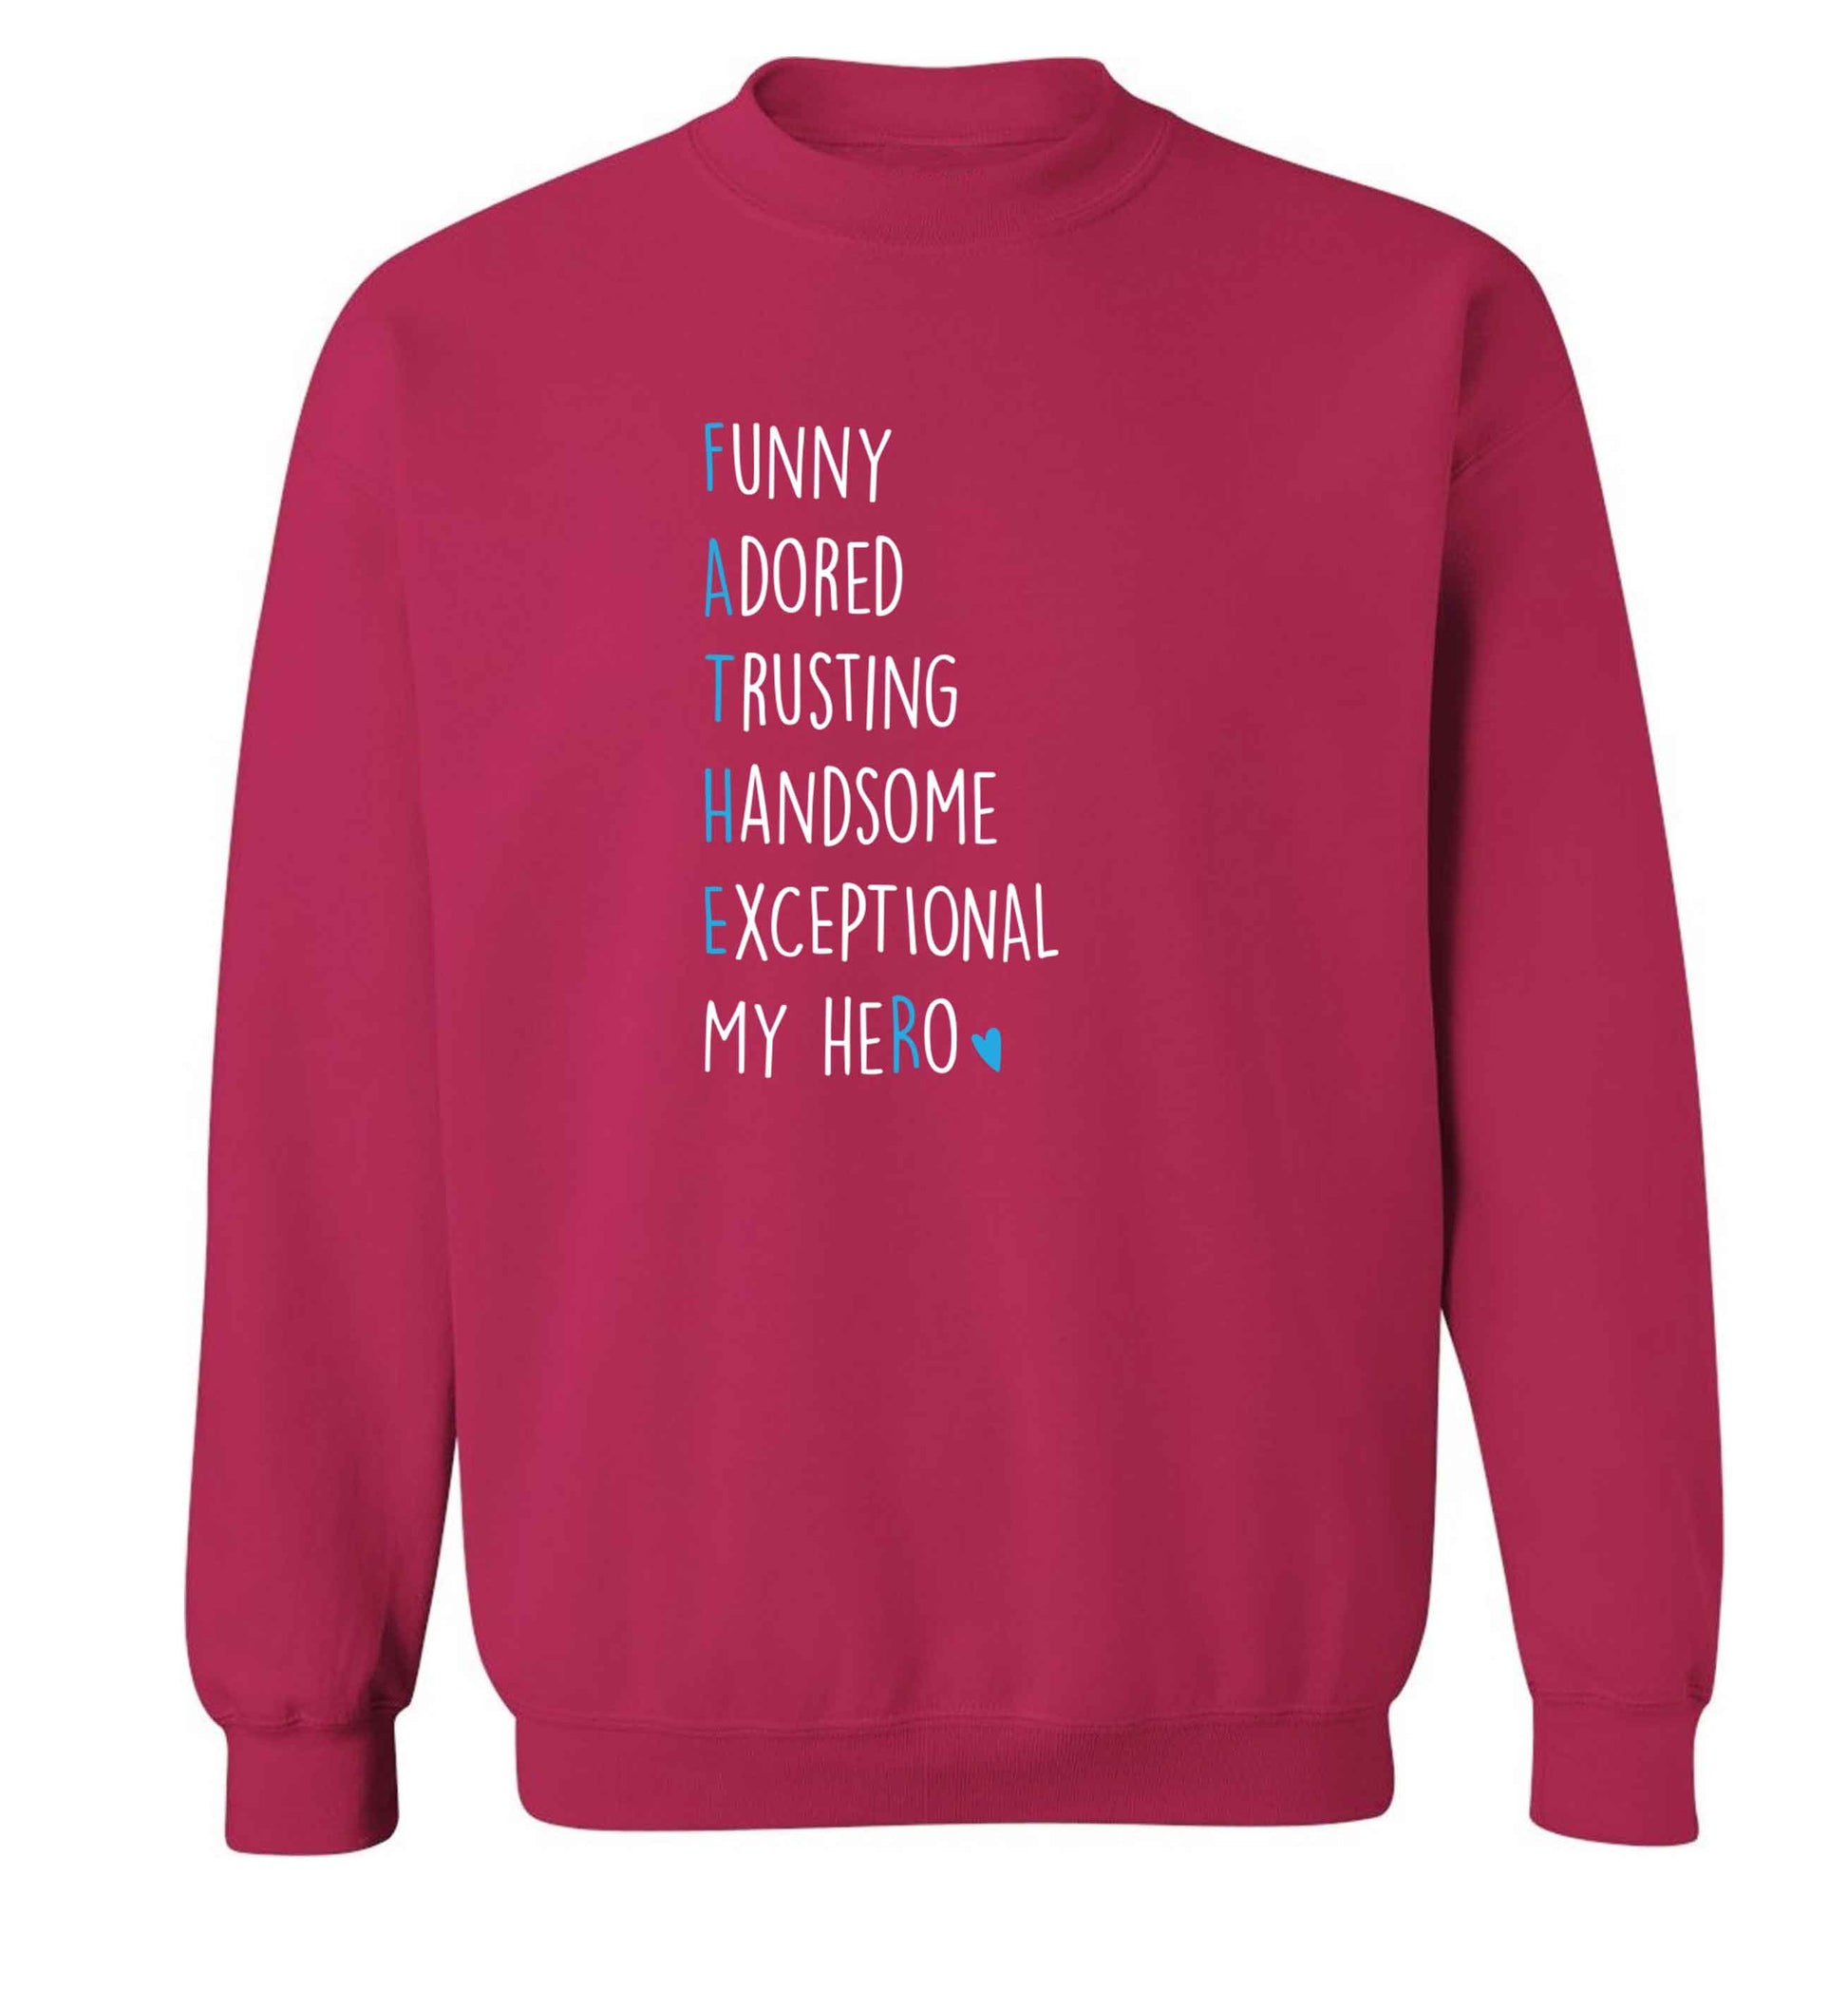 Father, funny adored trusting handsome exceptional my hero adult's unisex pink sweater 2XL